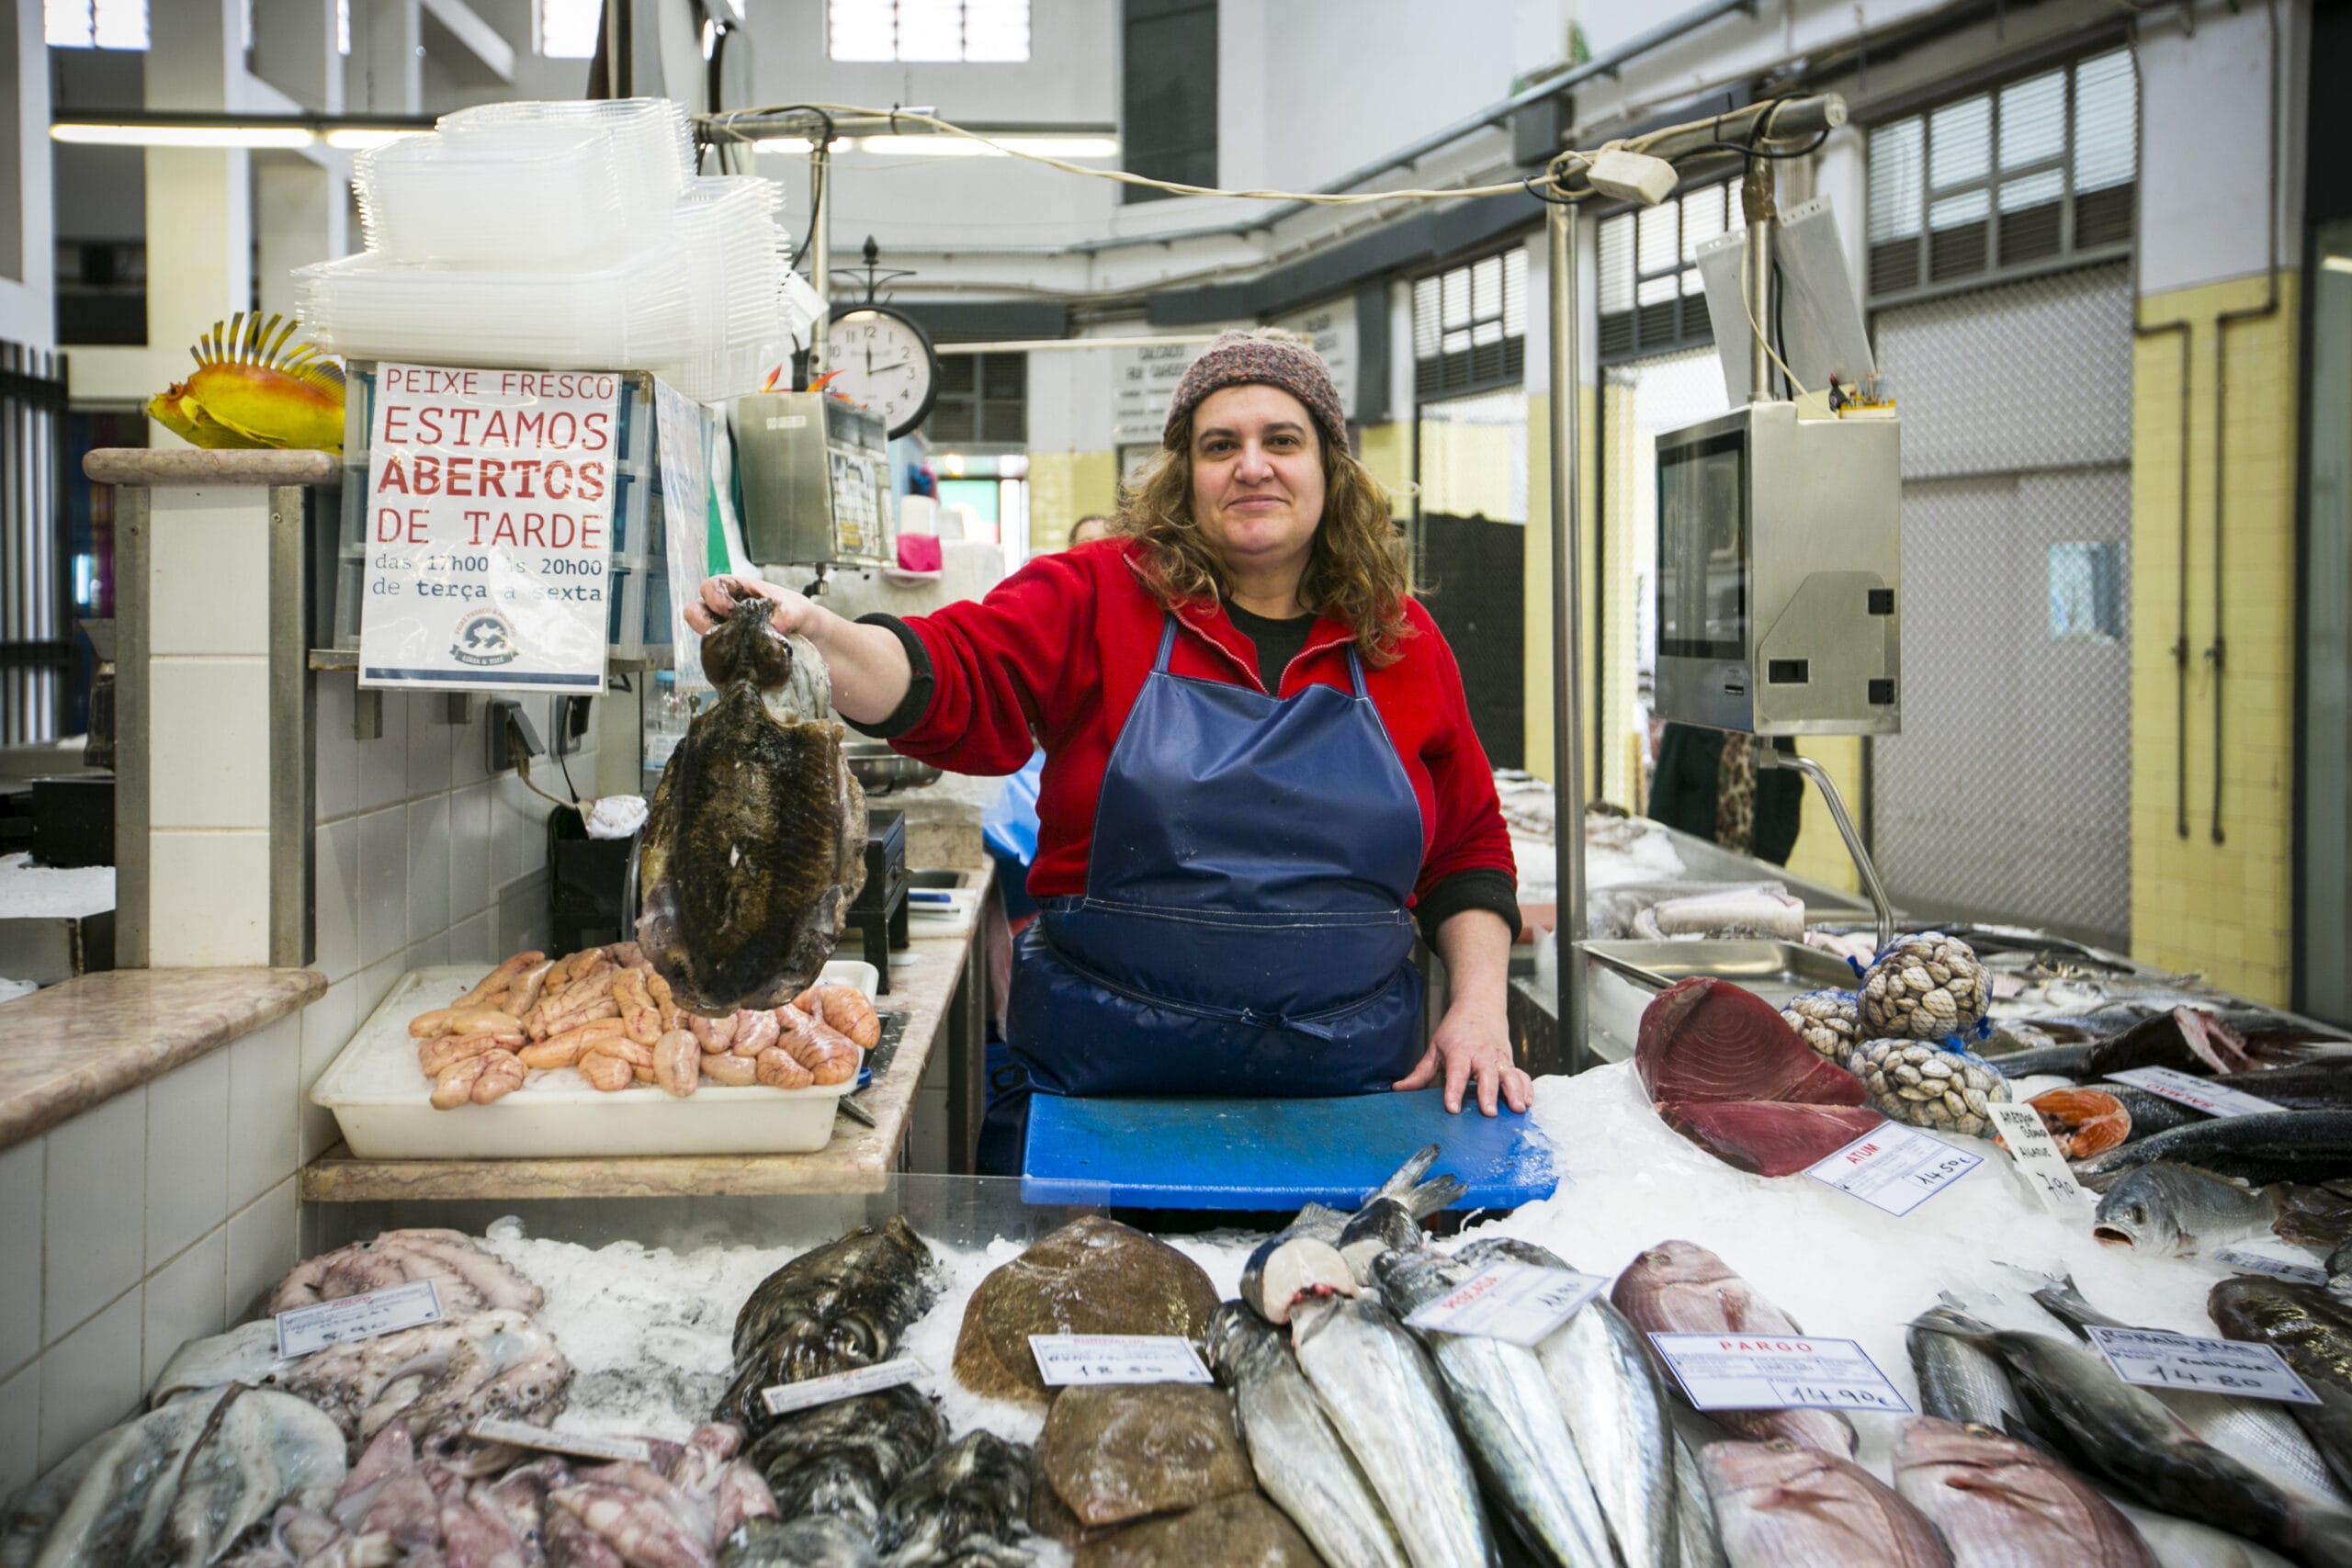 Meet Senhora Ruta and learn how to select cuttlefish like a pro